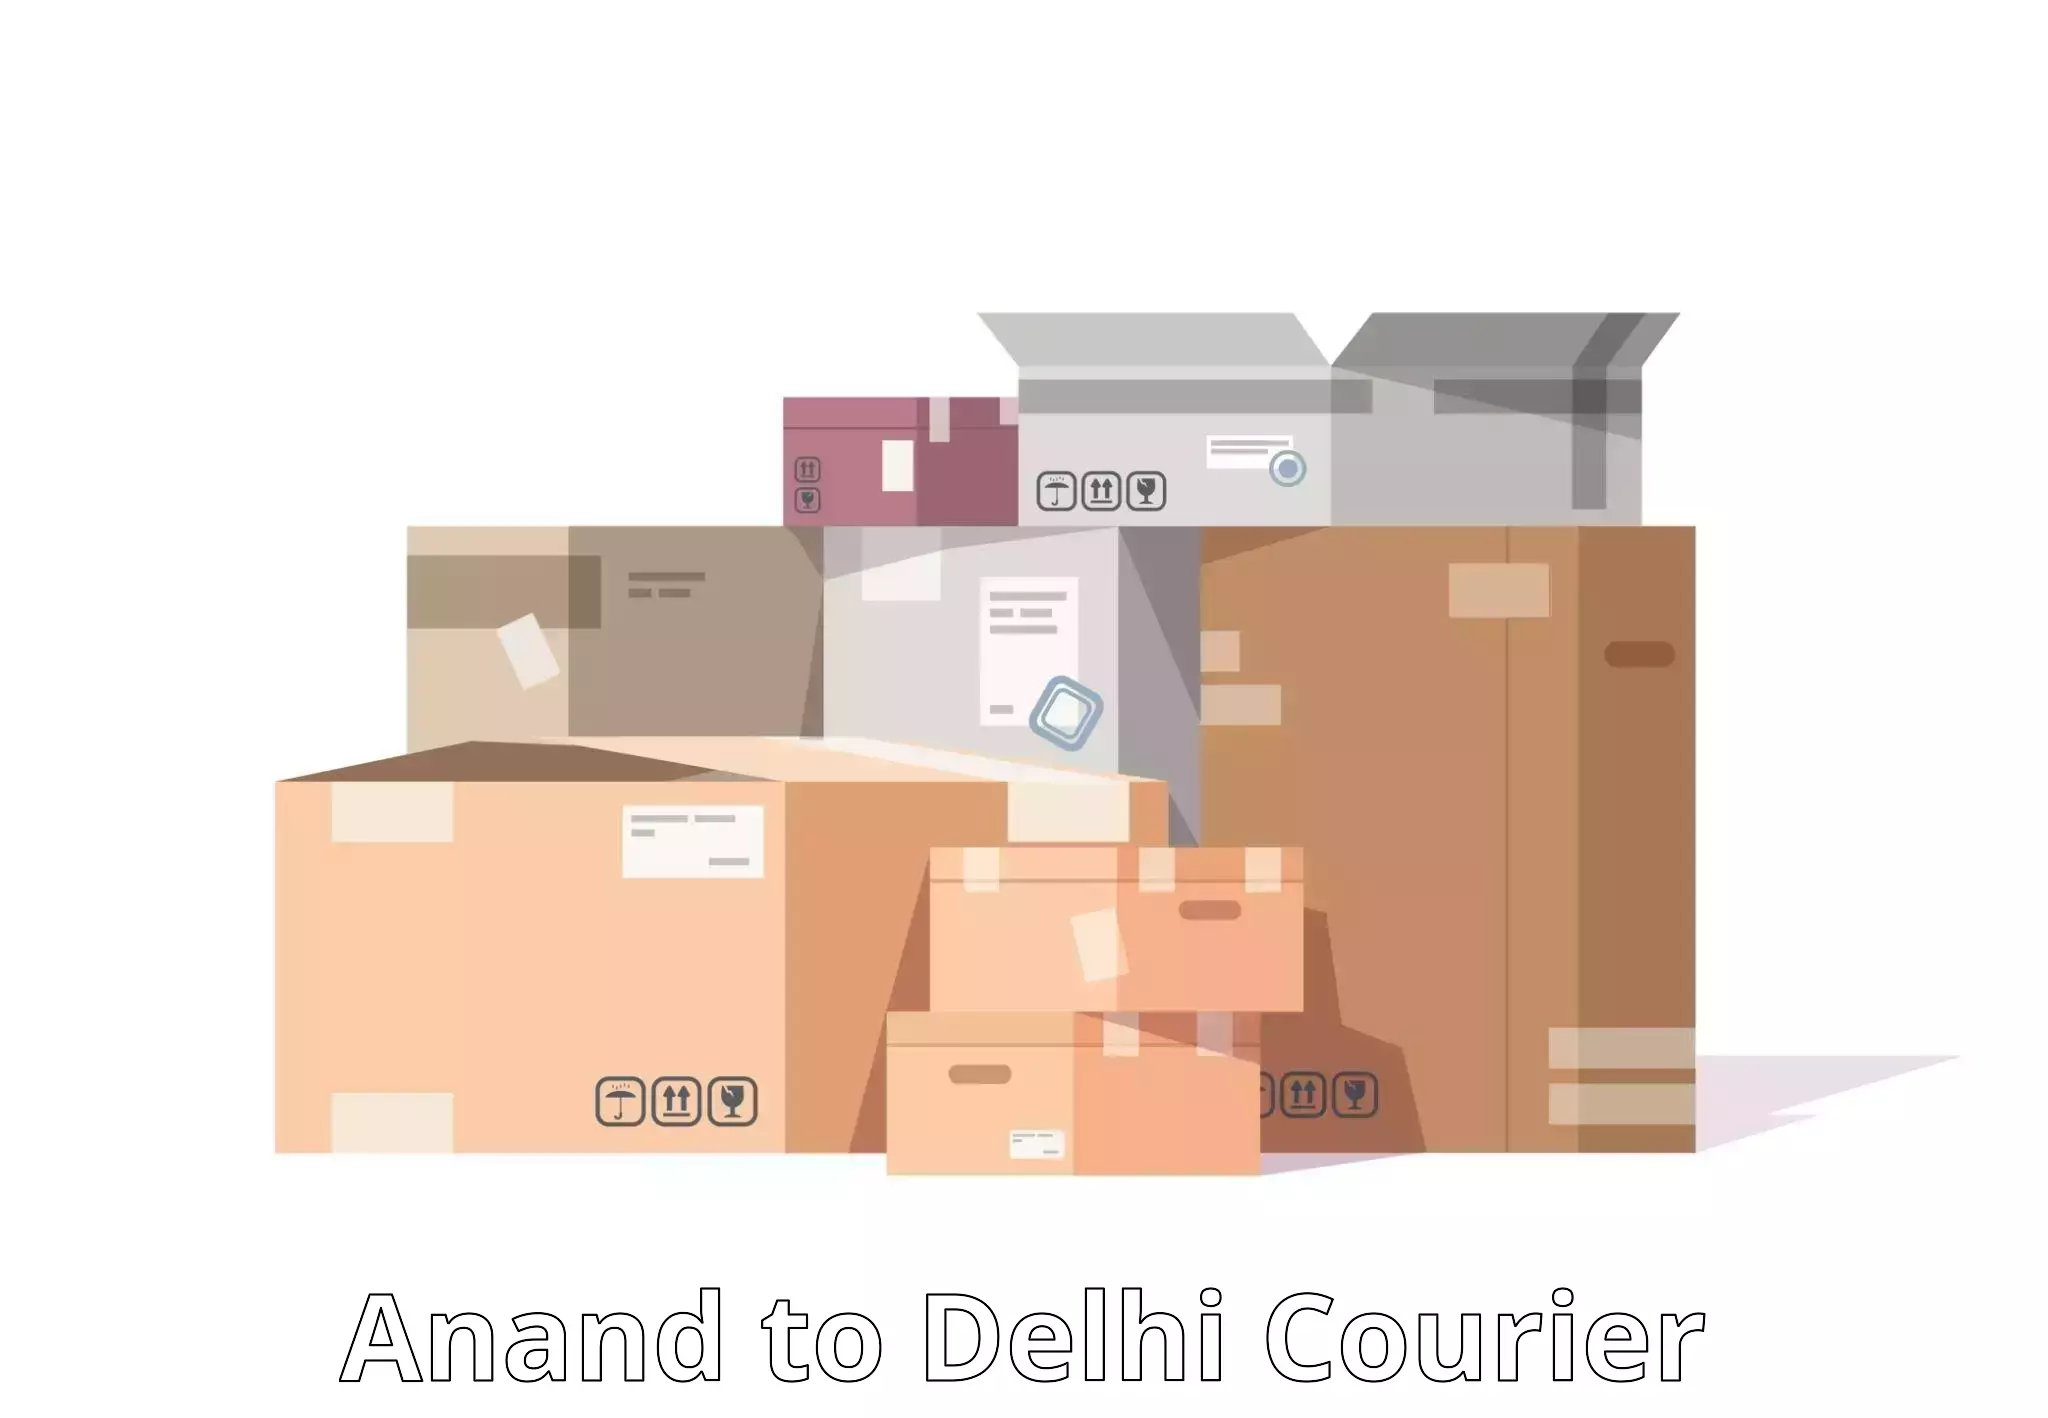 Express delivery capabilities Anand to Delhi